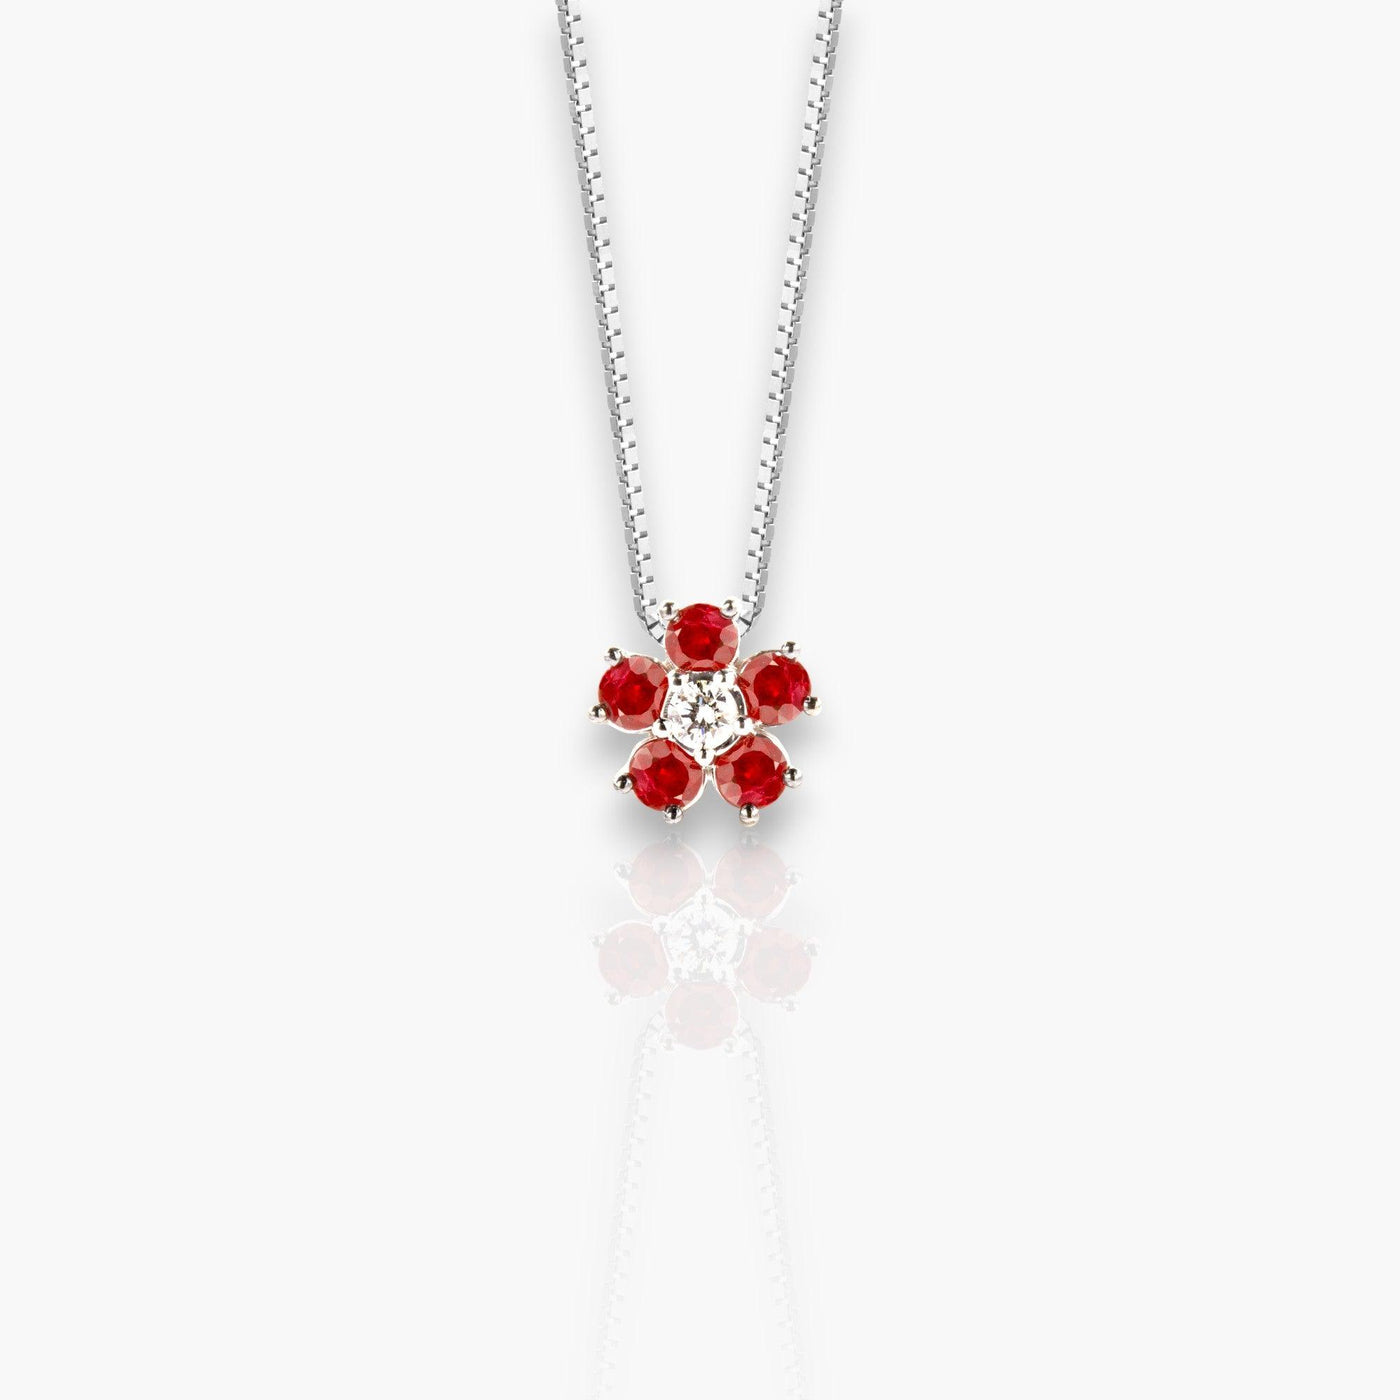 Necklace with red ruby flower - Moregola Fine Jewelry